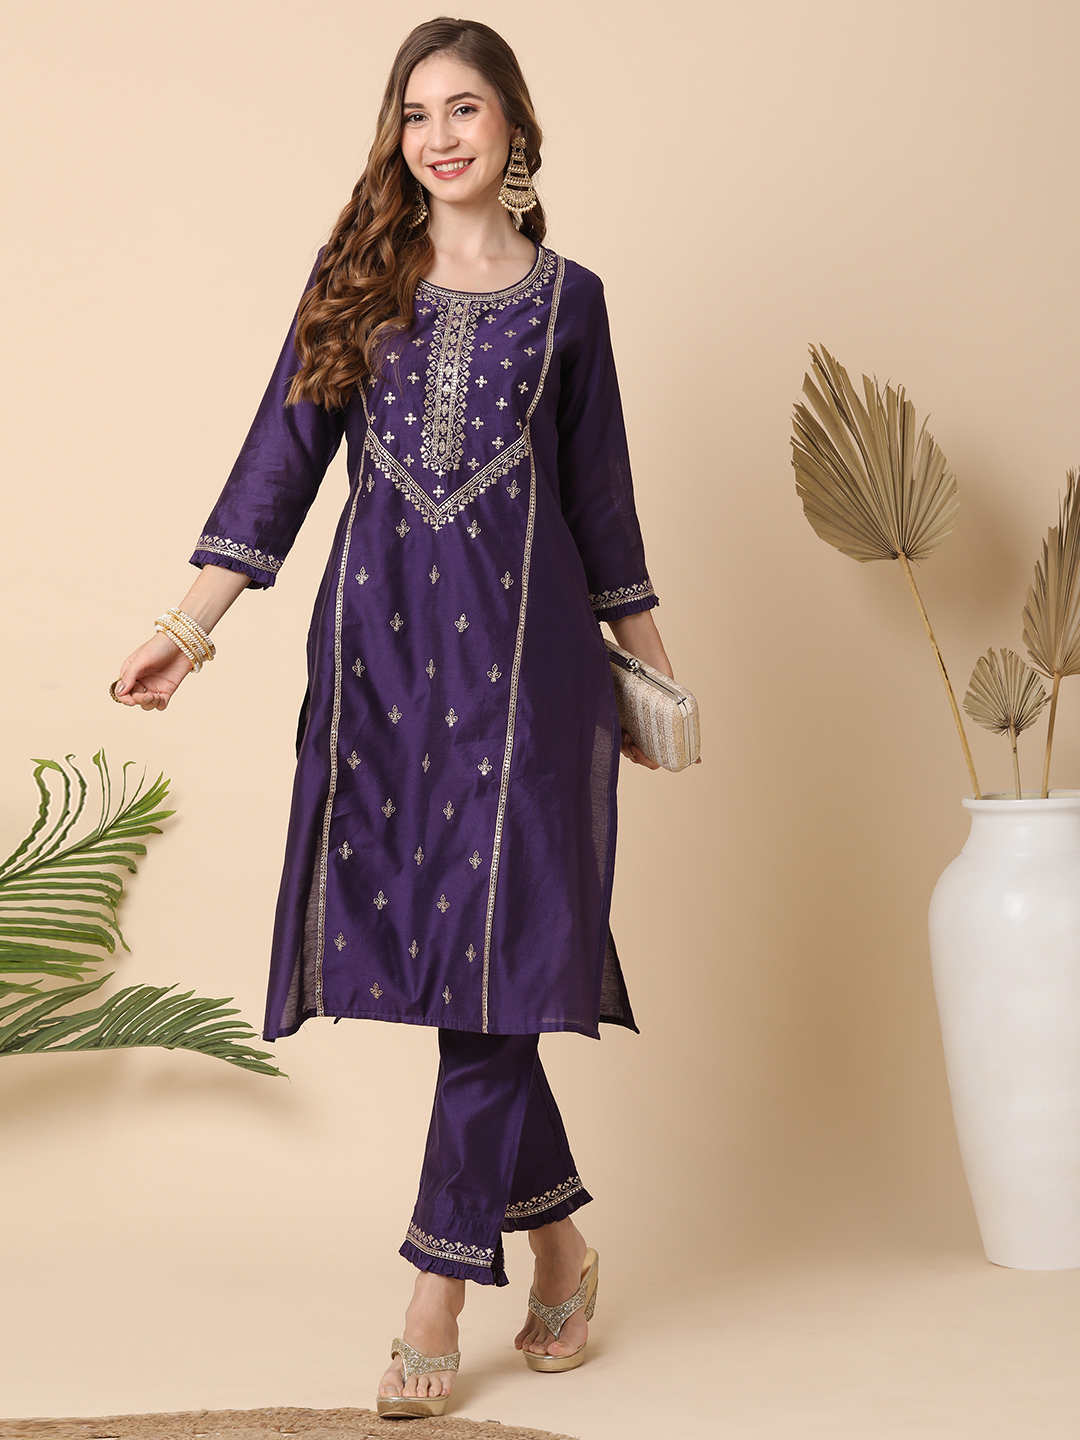 Globus Women Purple Allover Embroidered Panelled A-Line Kurta With Narrow Pants